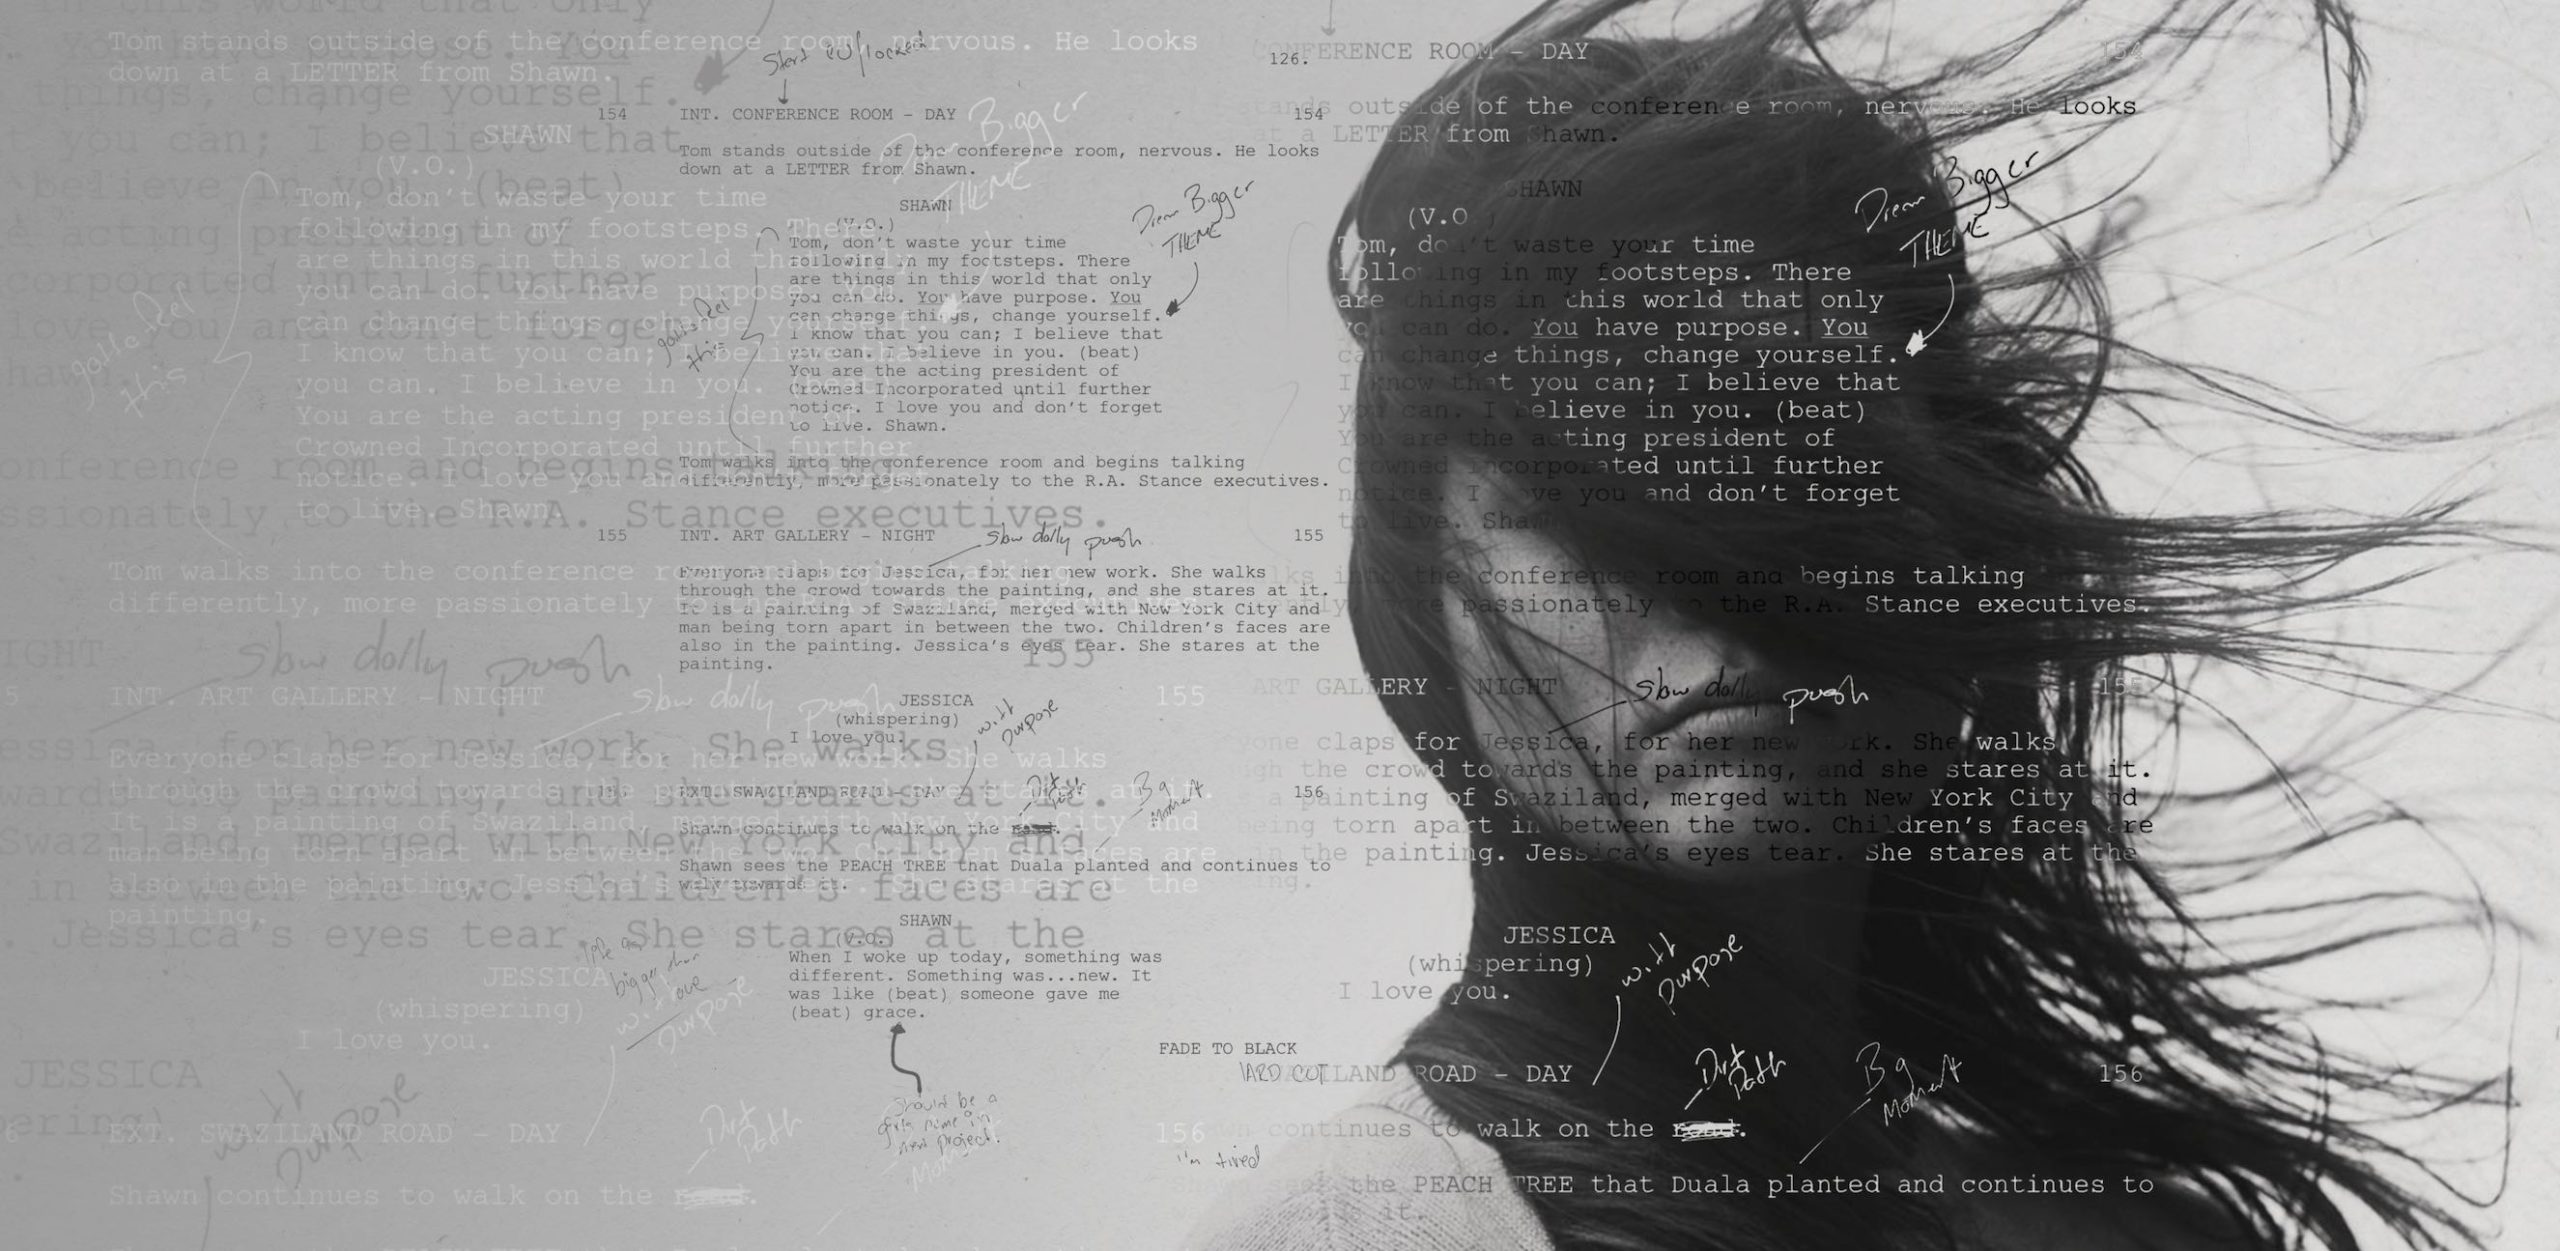 Black and white screenshot of woman with long hair in her face and script